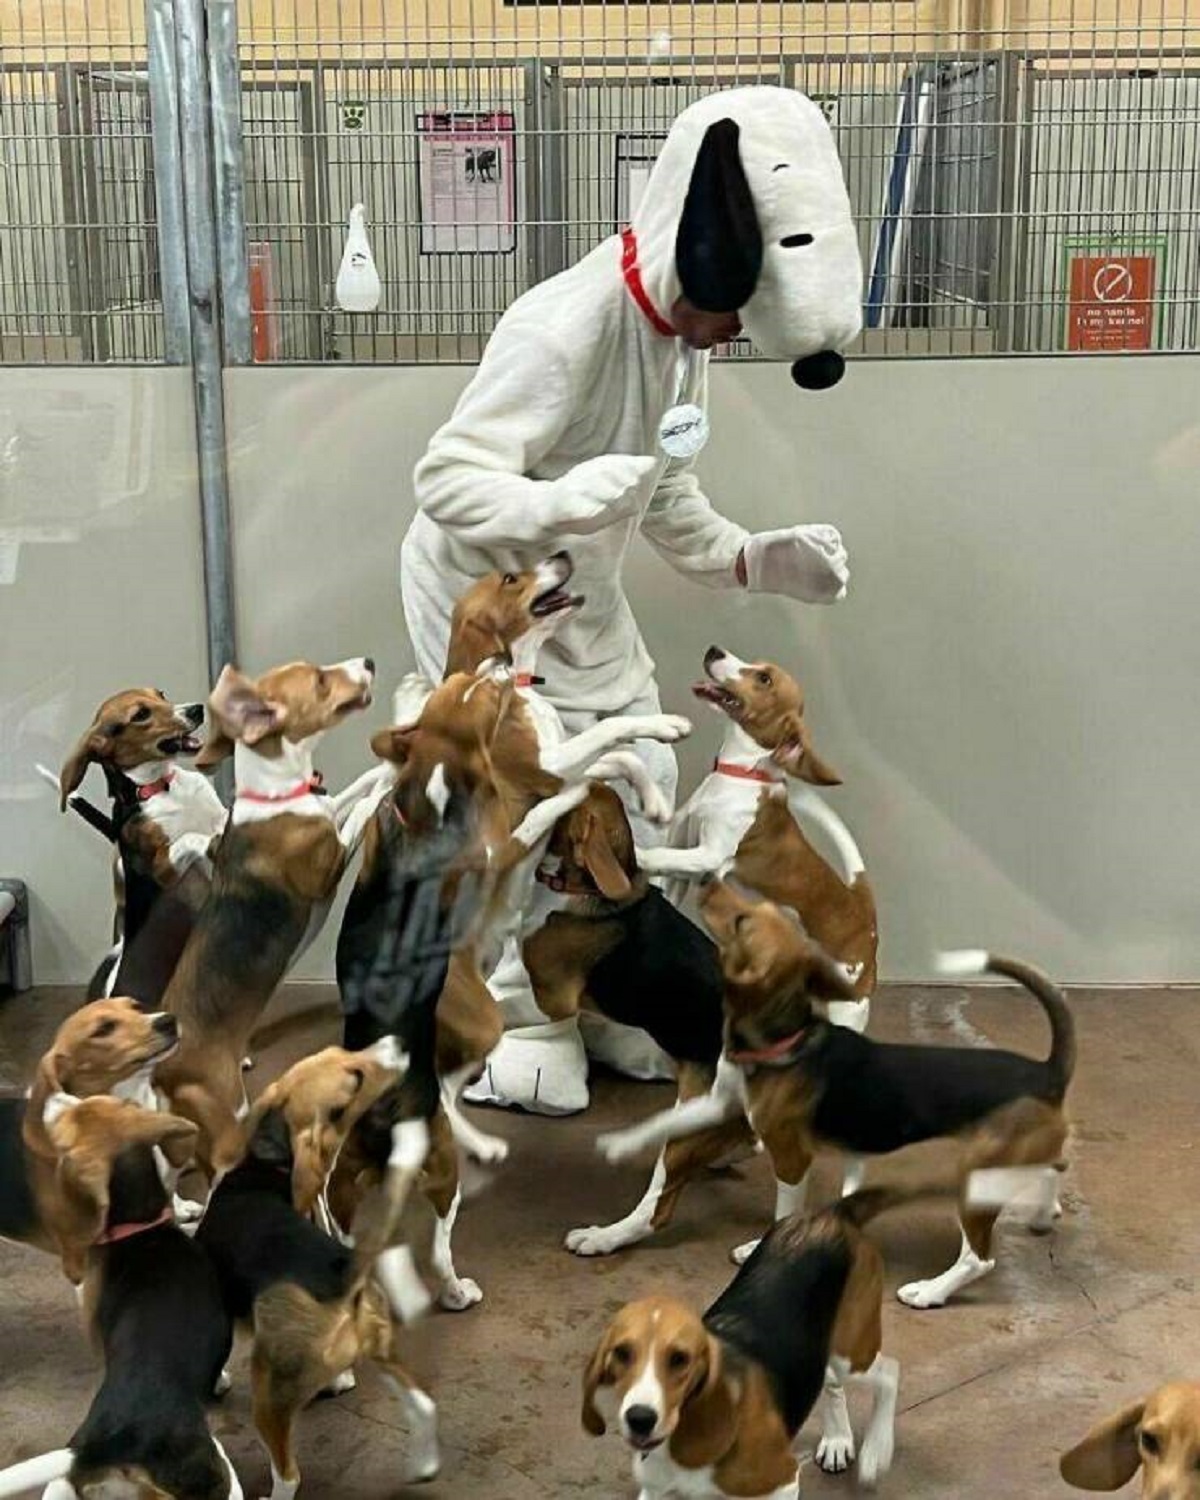 "Someone Dressed Up As Snoopy To Surprise Dogs At A Shelter. These Beagle Puppies Were Also Rescued From A Medical Testing Facility Which Added To Their Excitement"